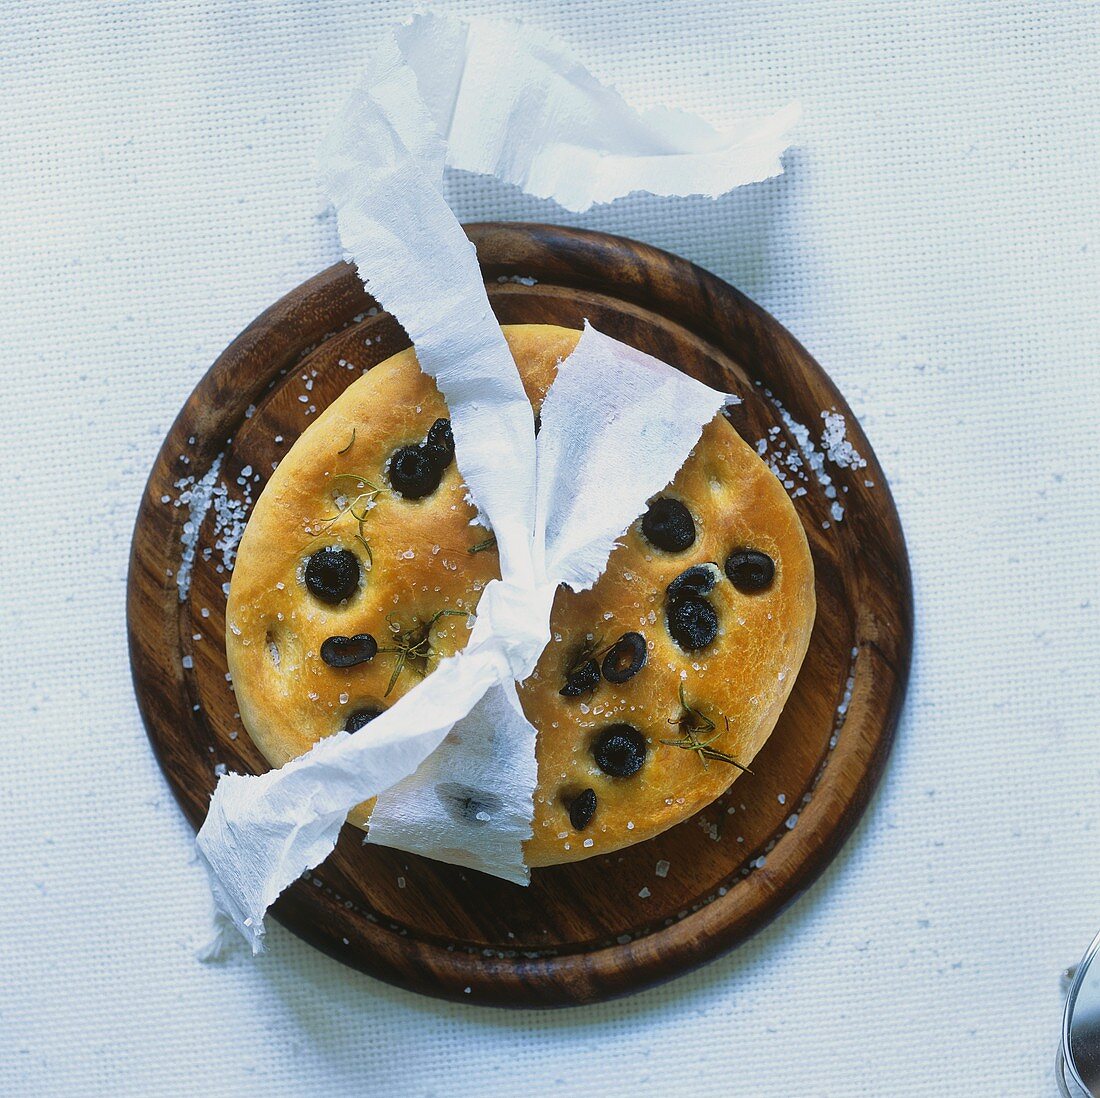 Focaccia con le olive (Flatbread with olives, Italy)